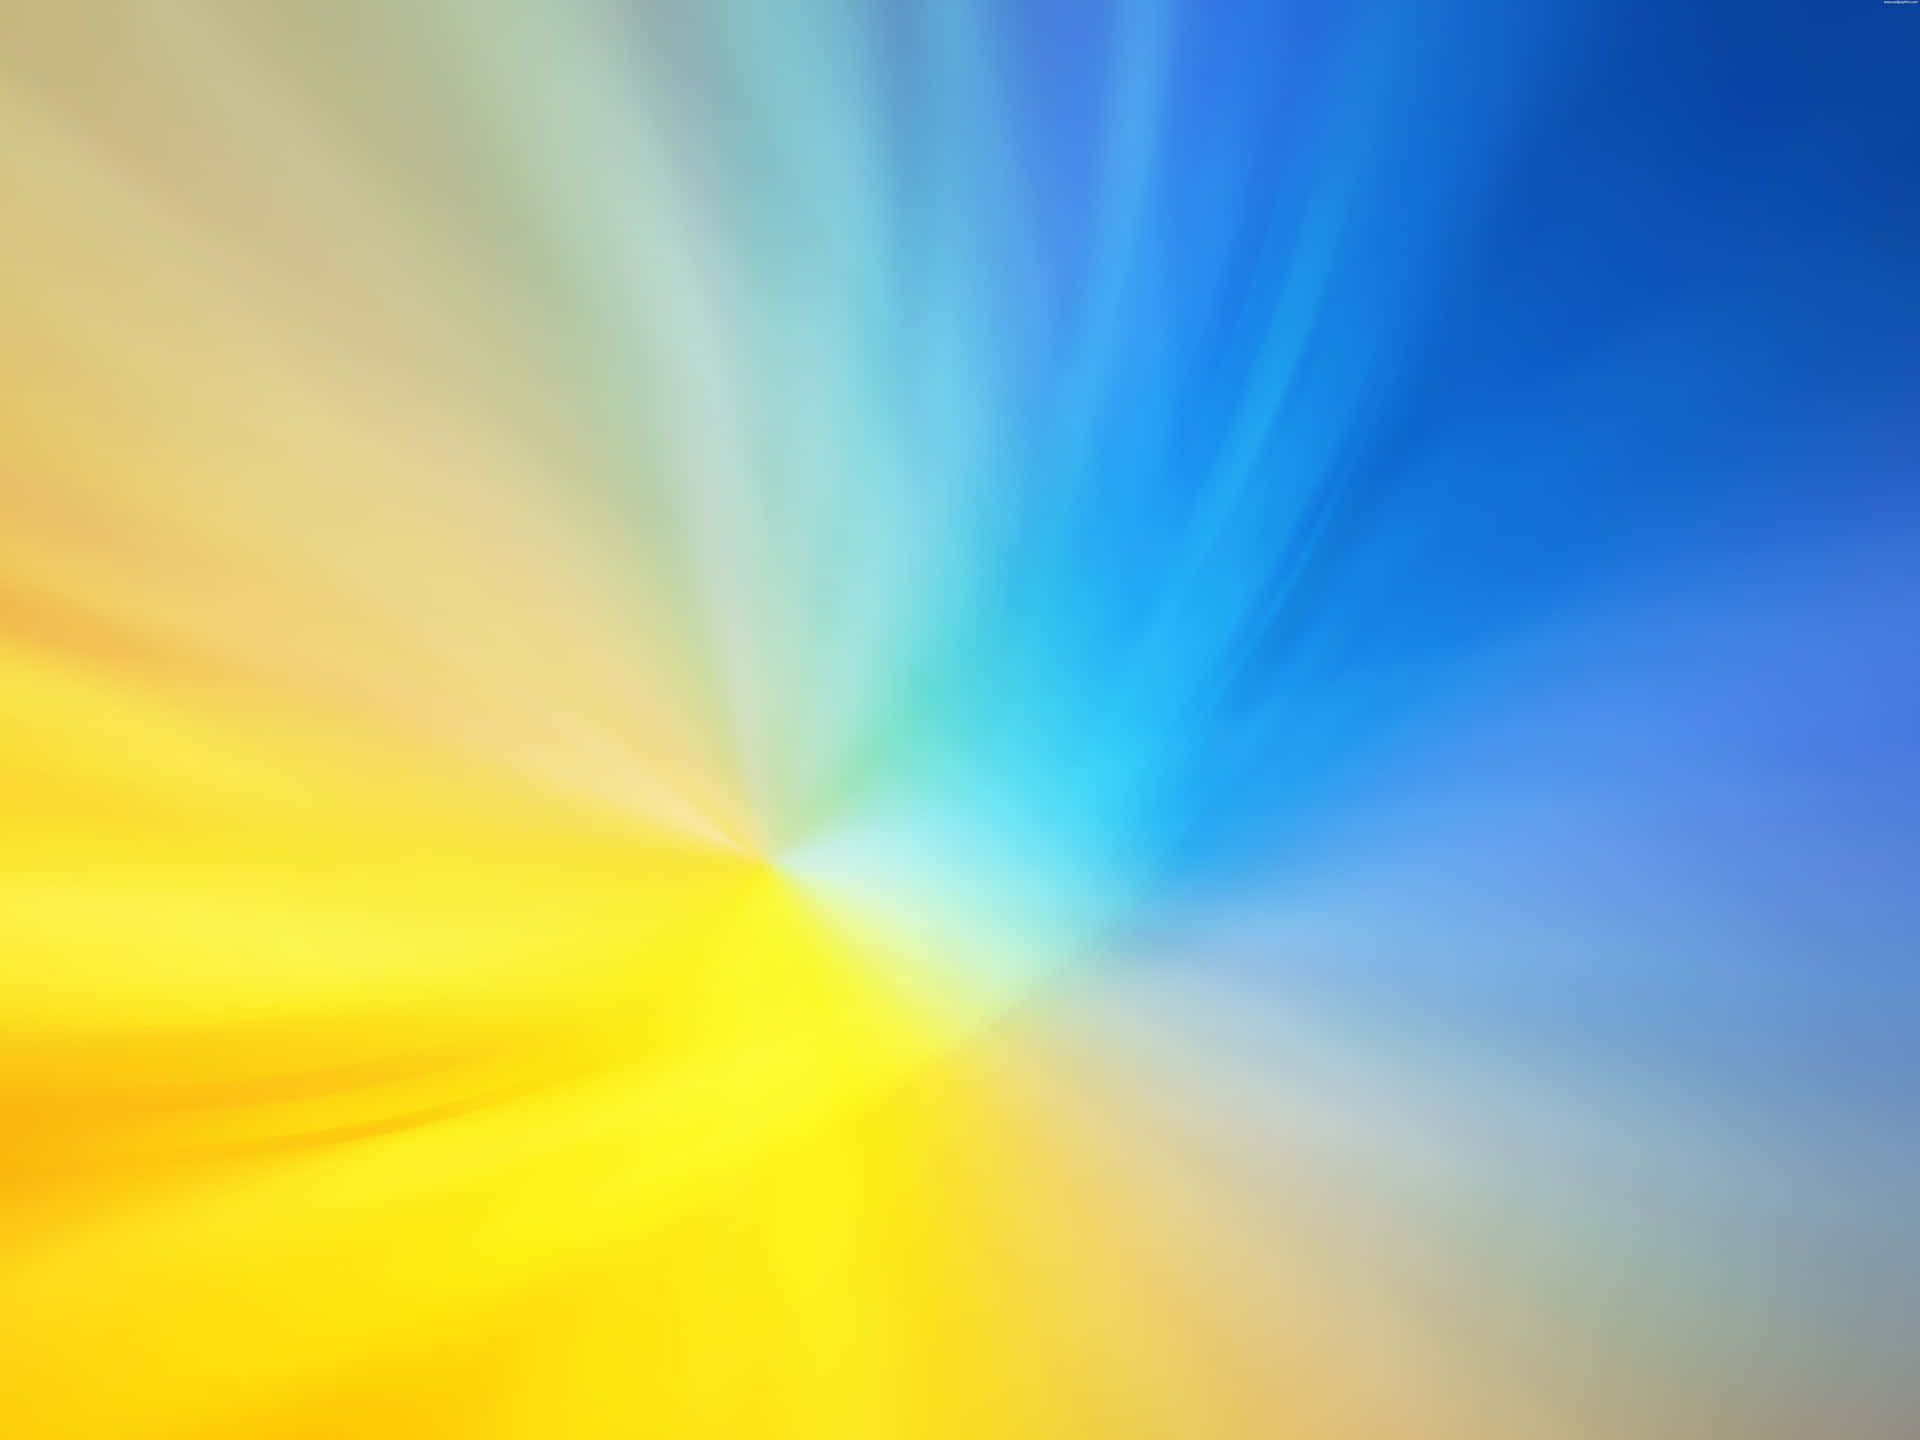 A Vibrant Yellow and Blue Abstract Background